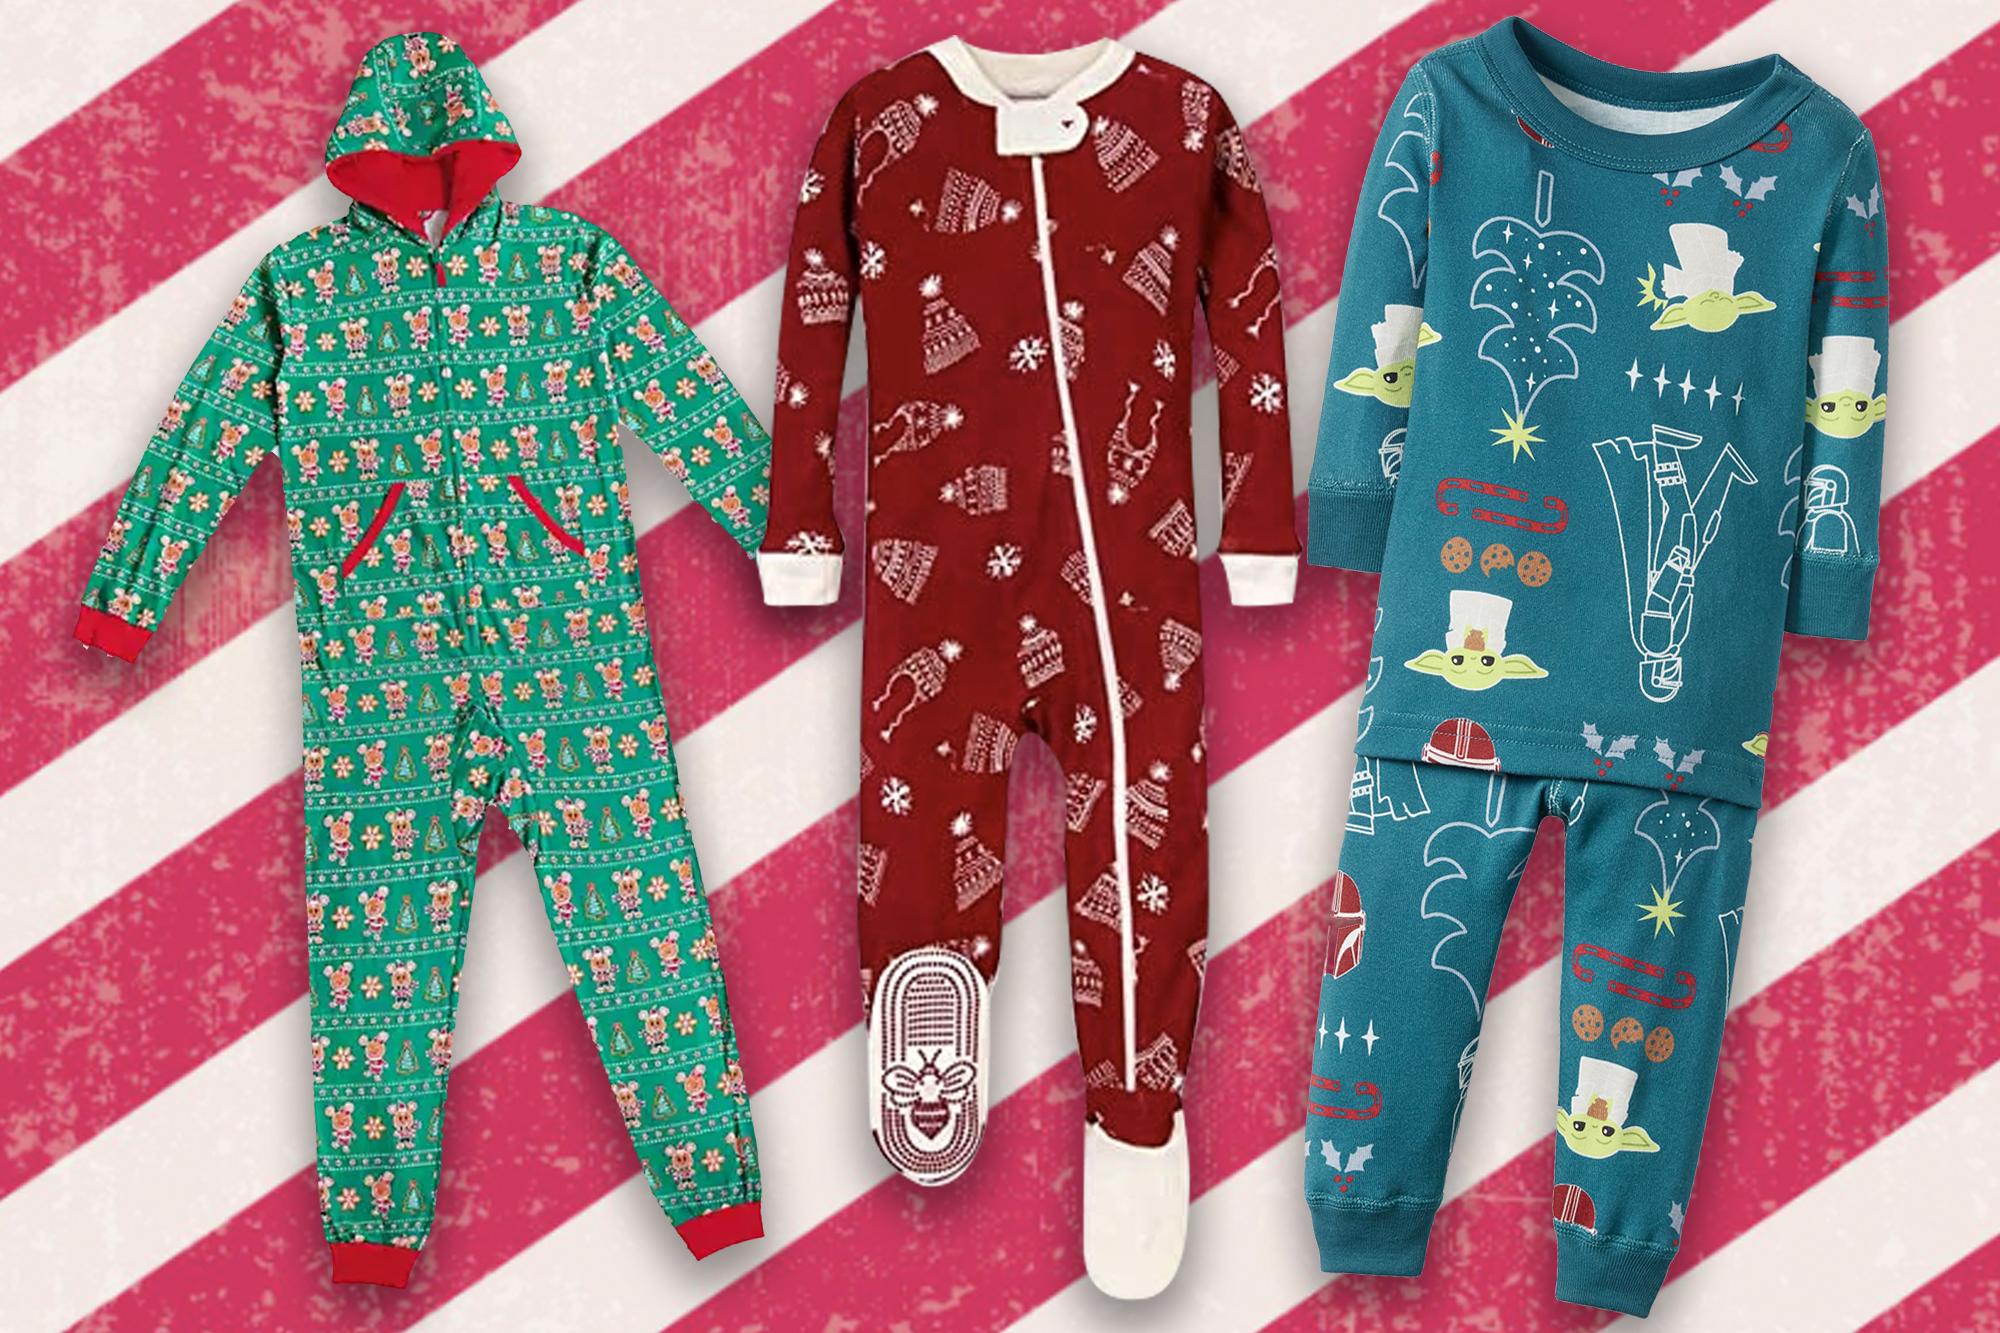 The 10 handiest matching Christmas pajama units for the full household in 2021